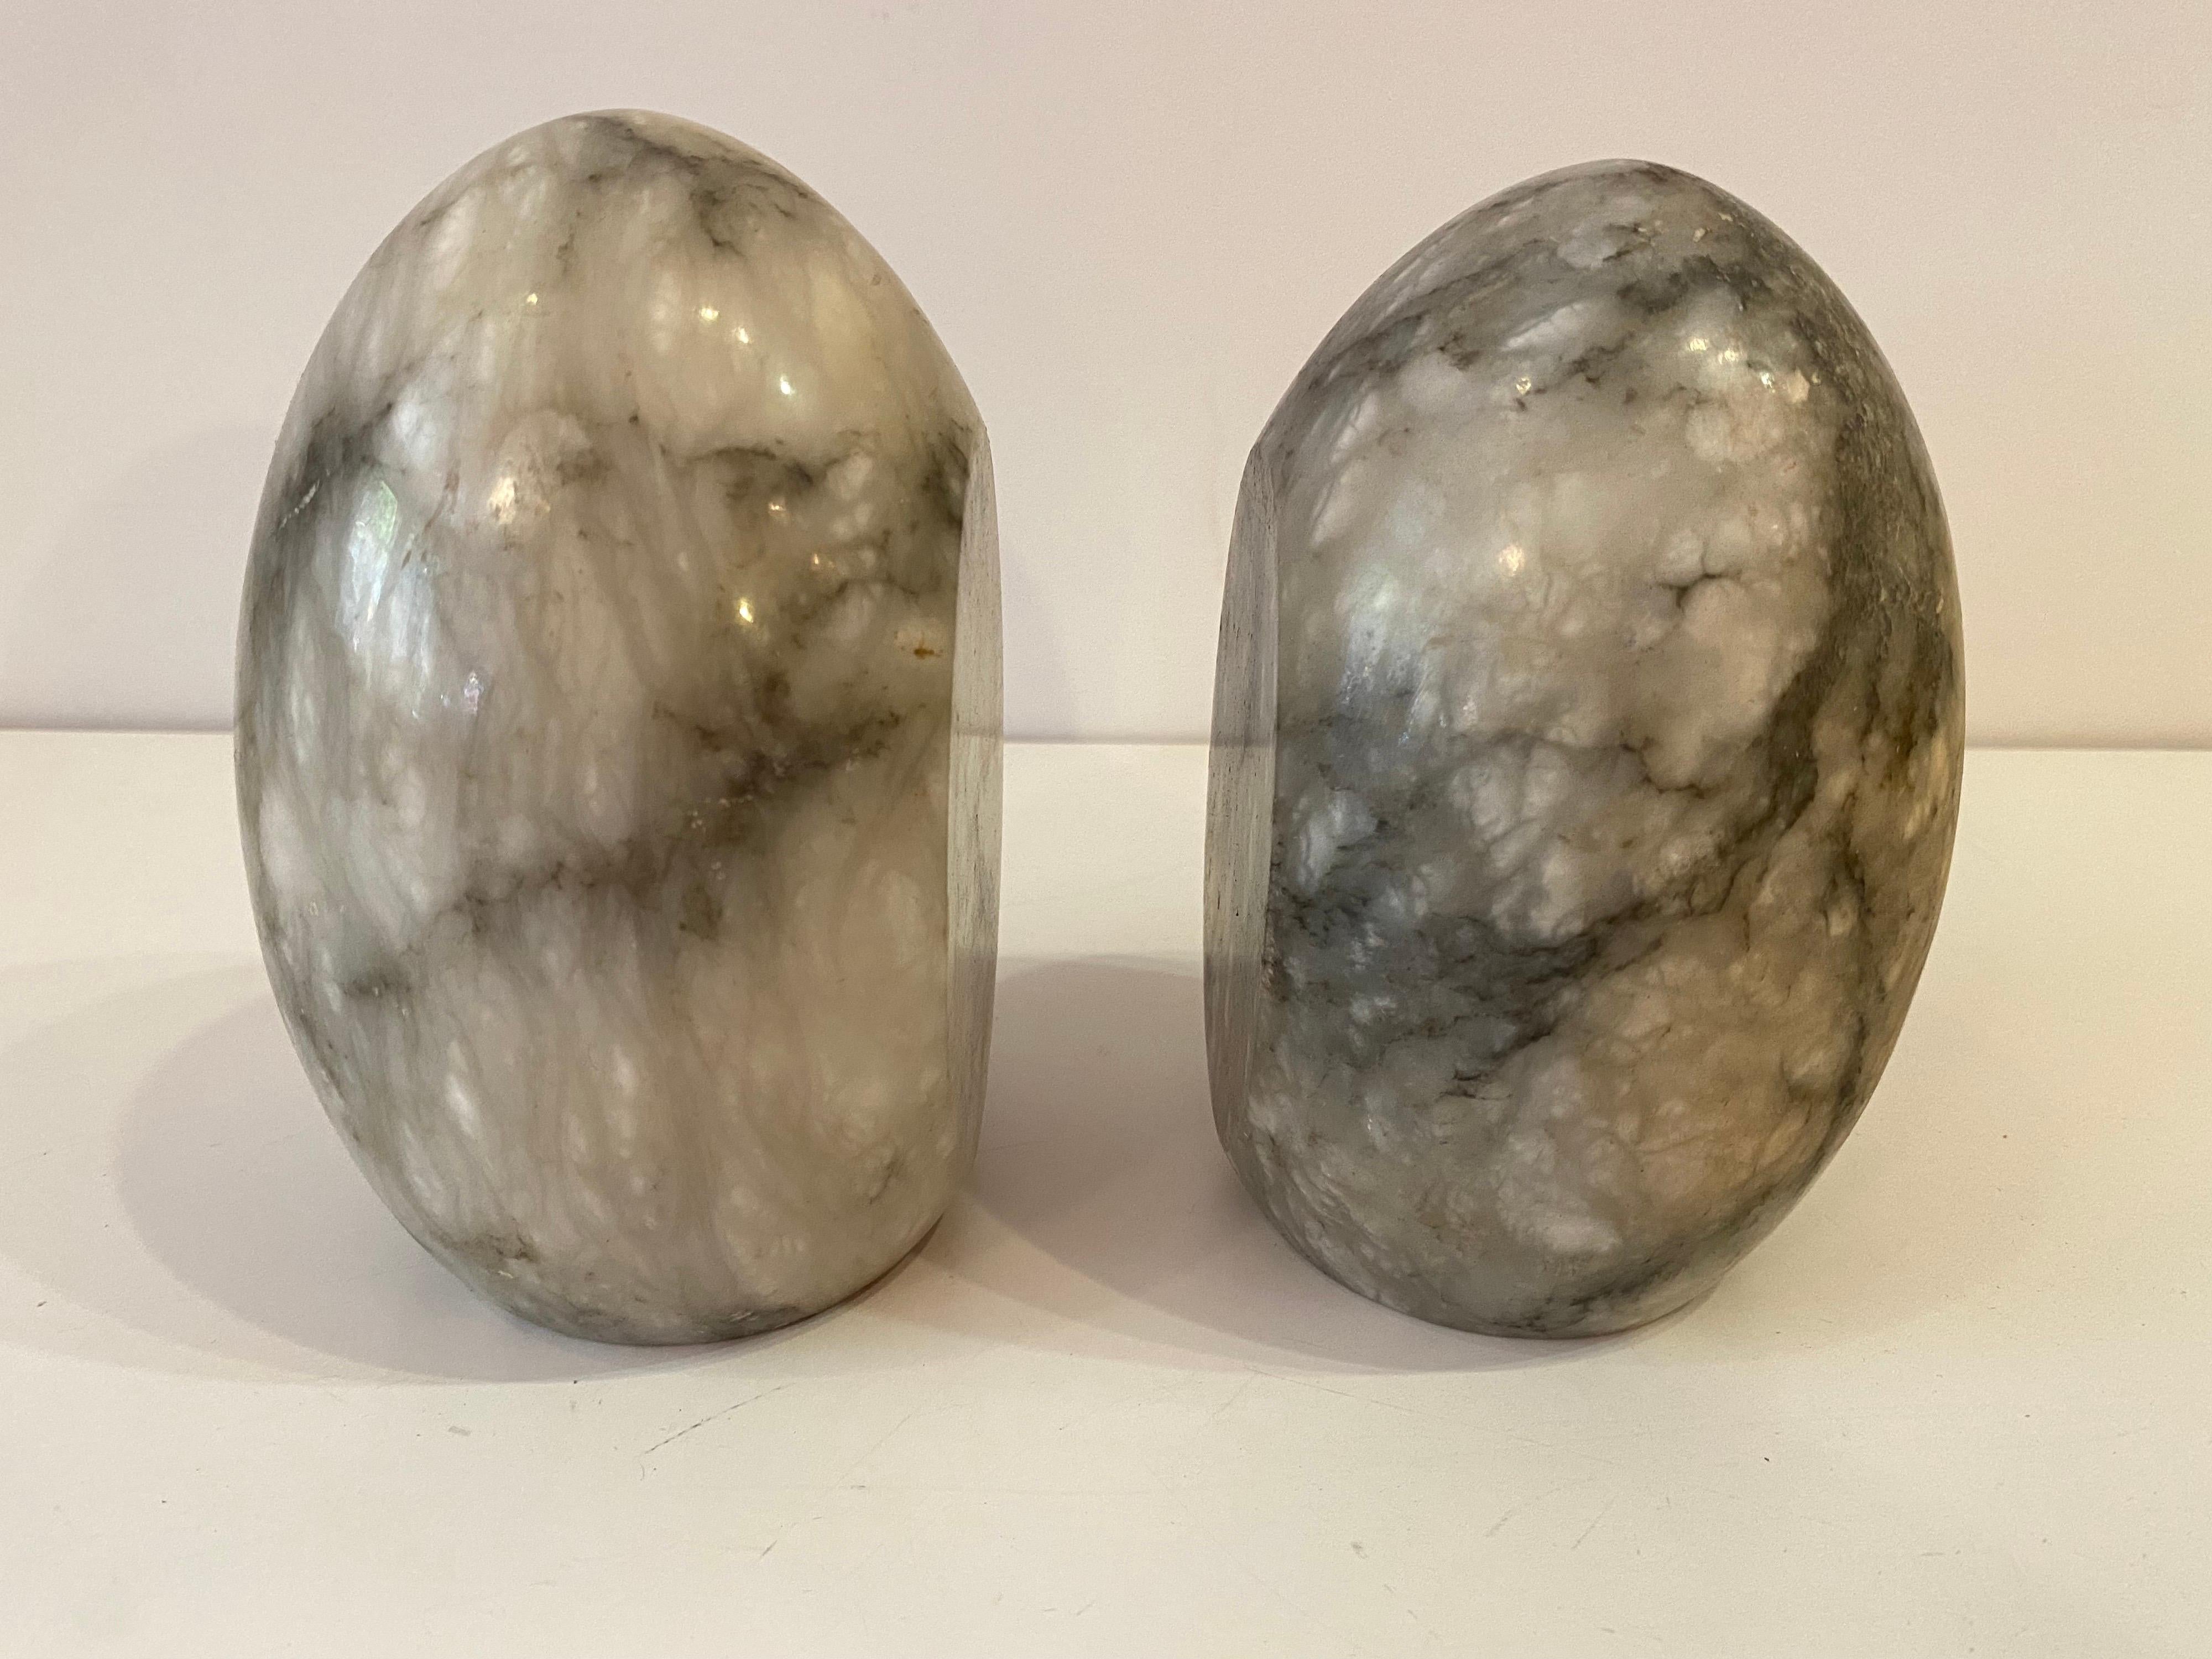 Egg shaped marble bookends. Each egg has a flat side to hold books tight! White marble with gray graining throughout. Nice size measuring 5.5 tall and 3.5 across.